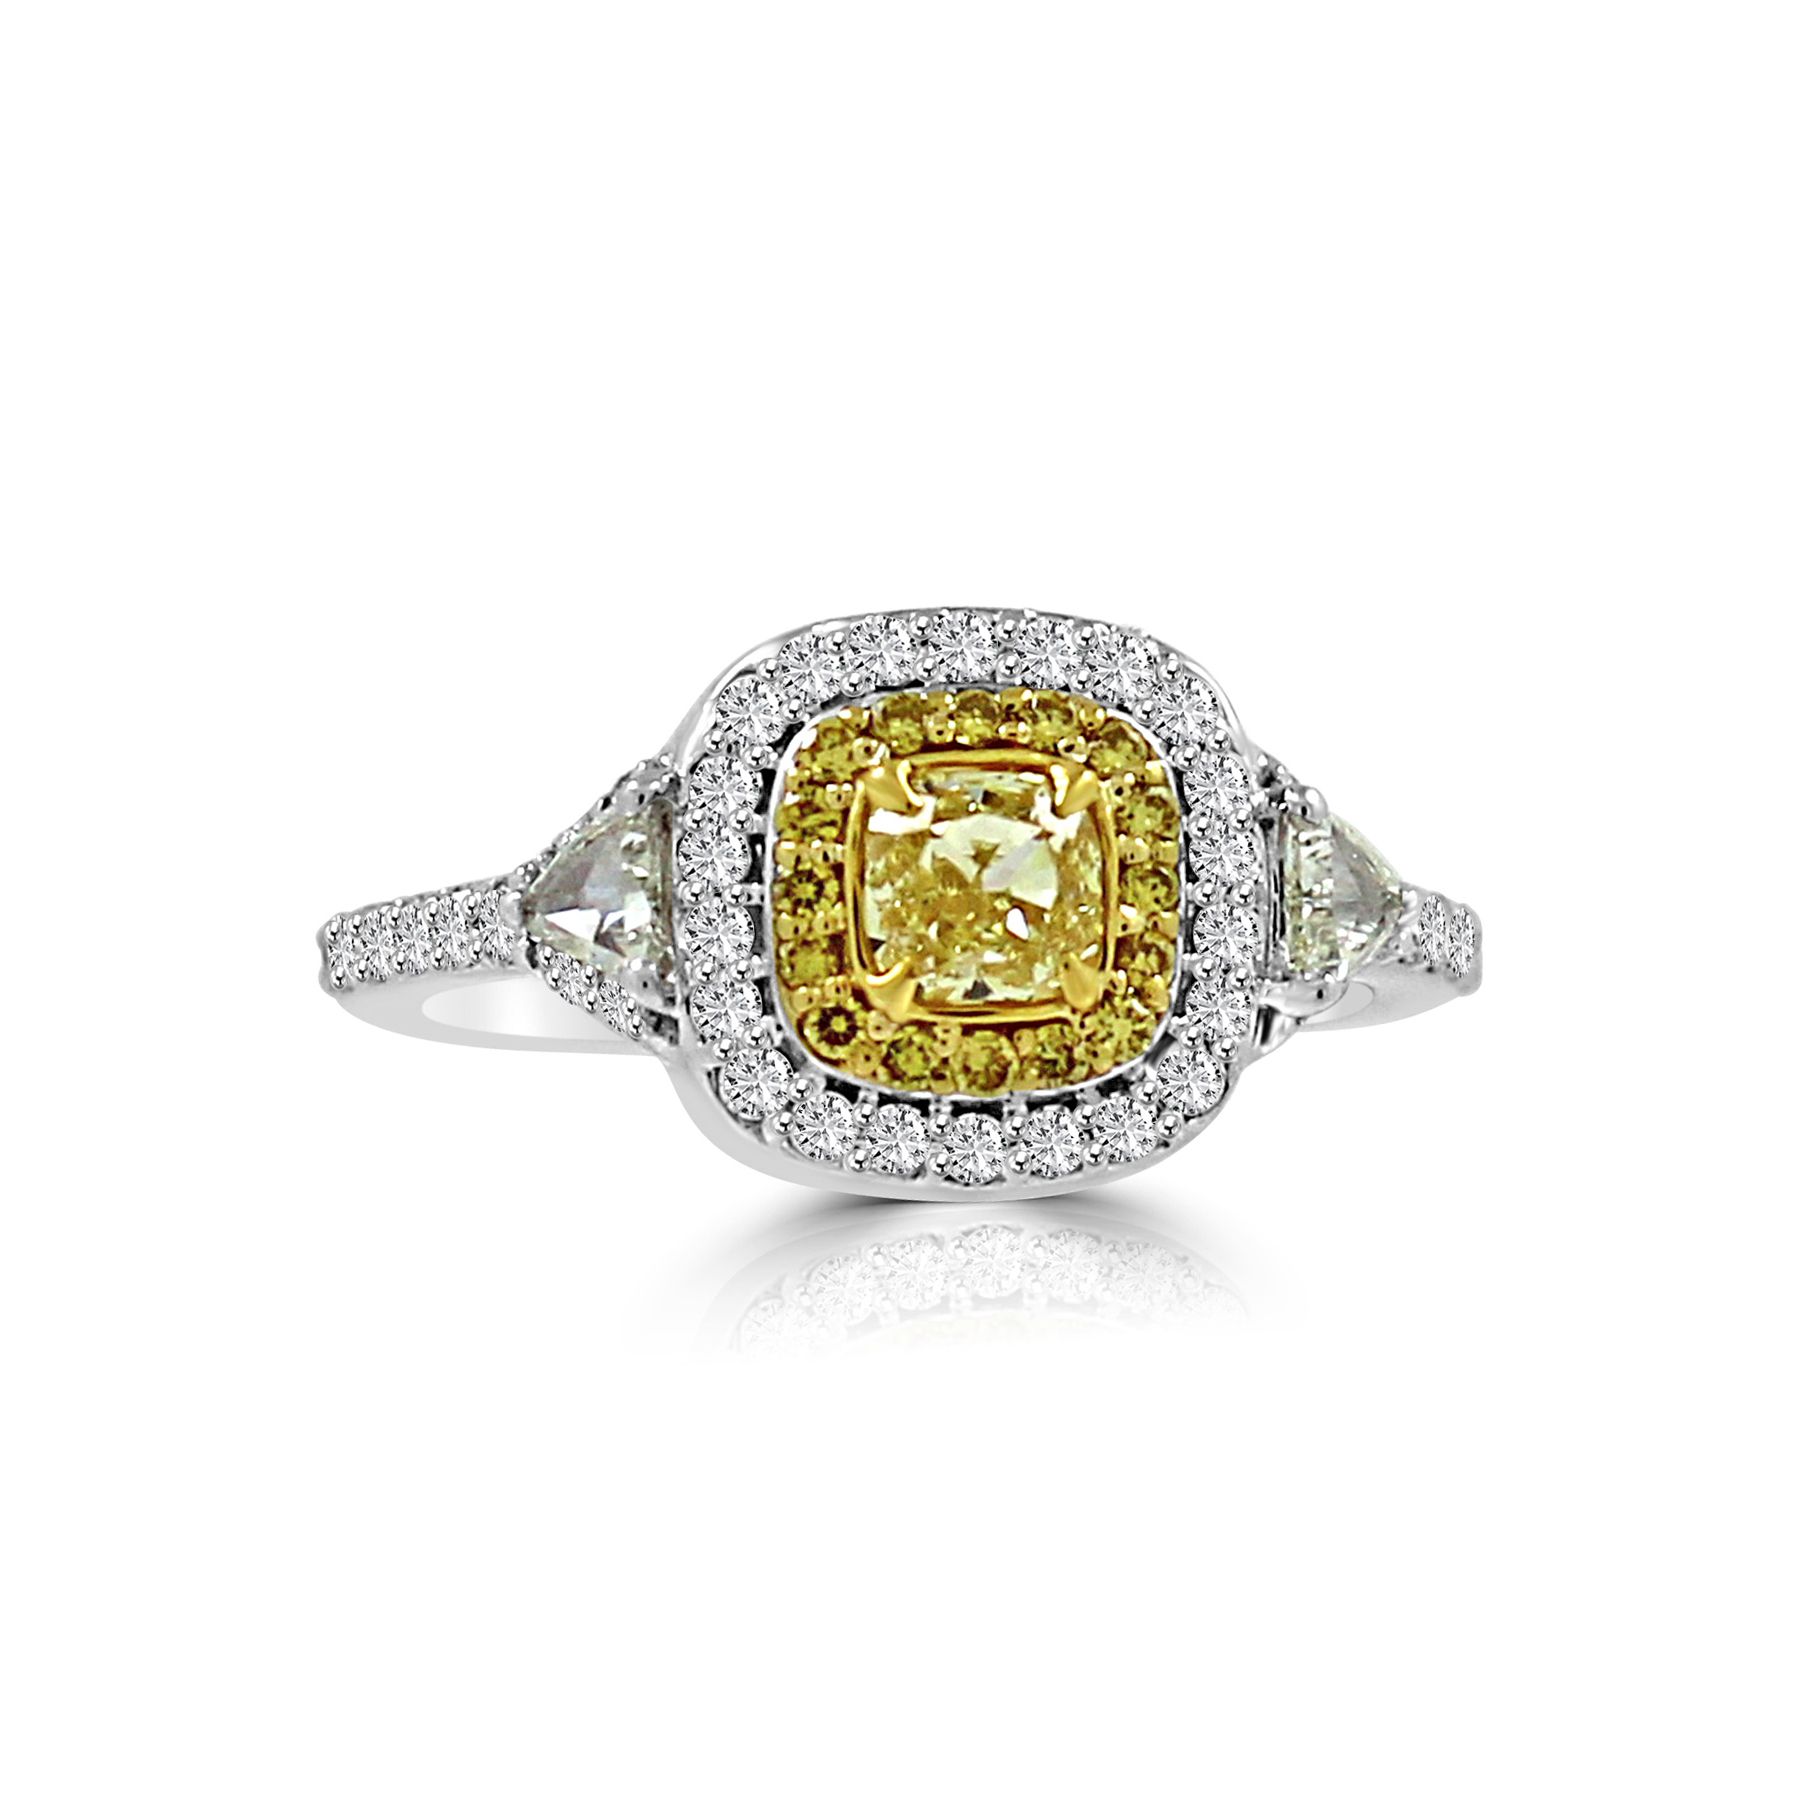 Natural Fancy Yellow Color Diamond Ring